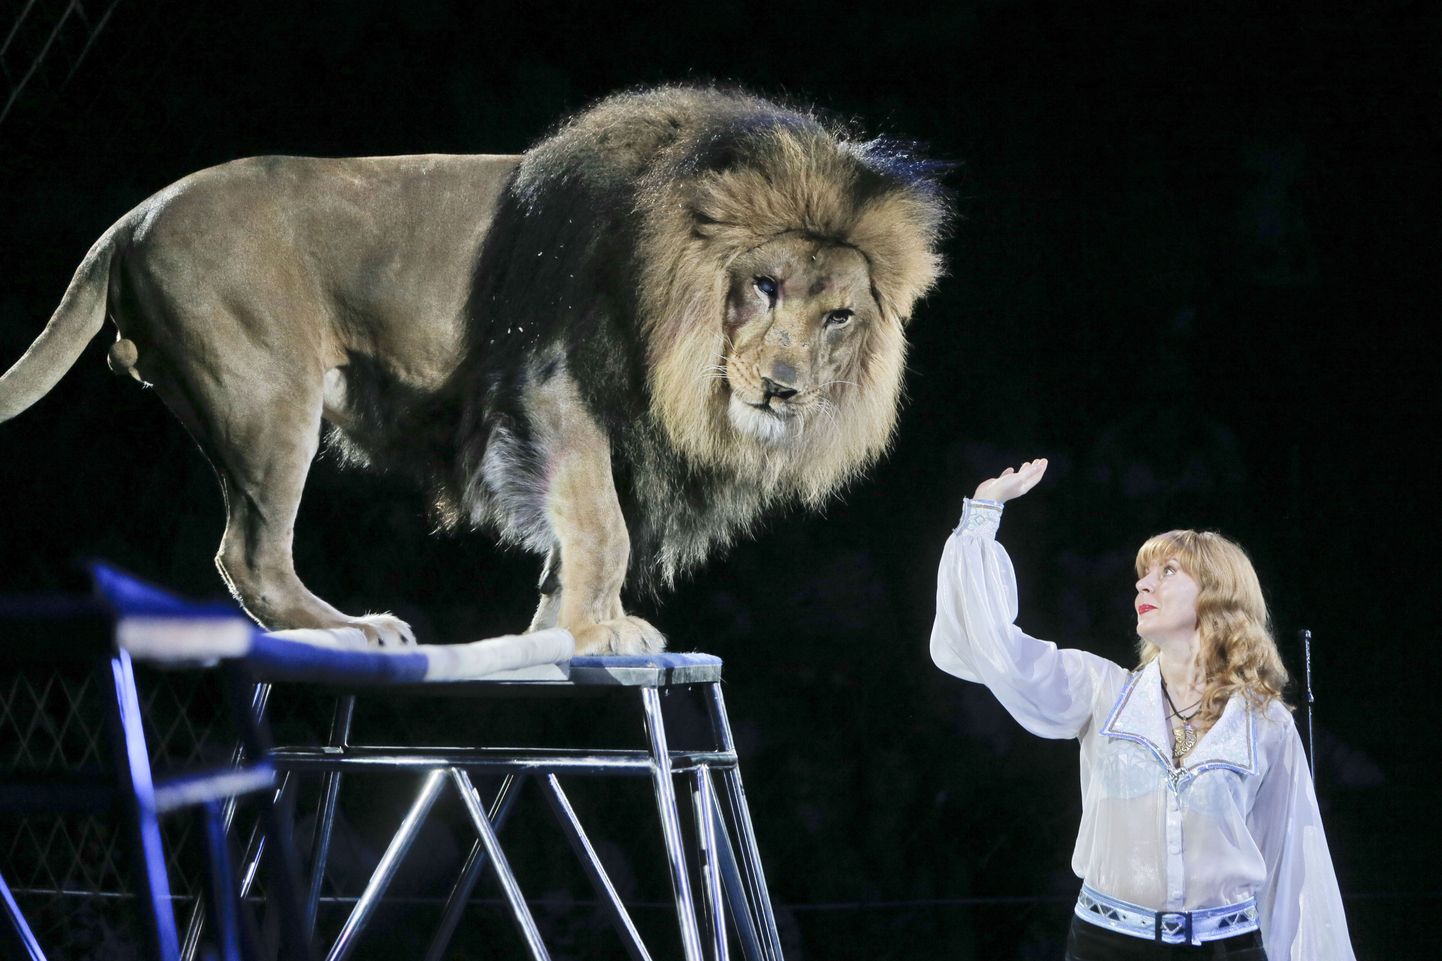 Veronika Pinko, a circus artist, performs with the  lion during a show in Ukraine's National Circus in Kiev, Ukraine, Sunday, June 9, 2013. (AP Photo/Efrem Lukatsky) / SCANPIX Code: 436